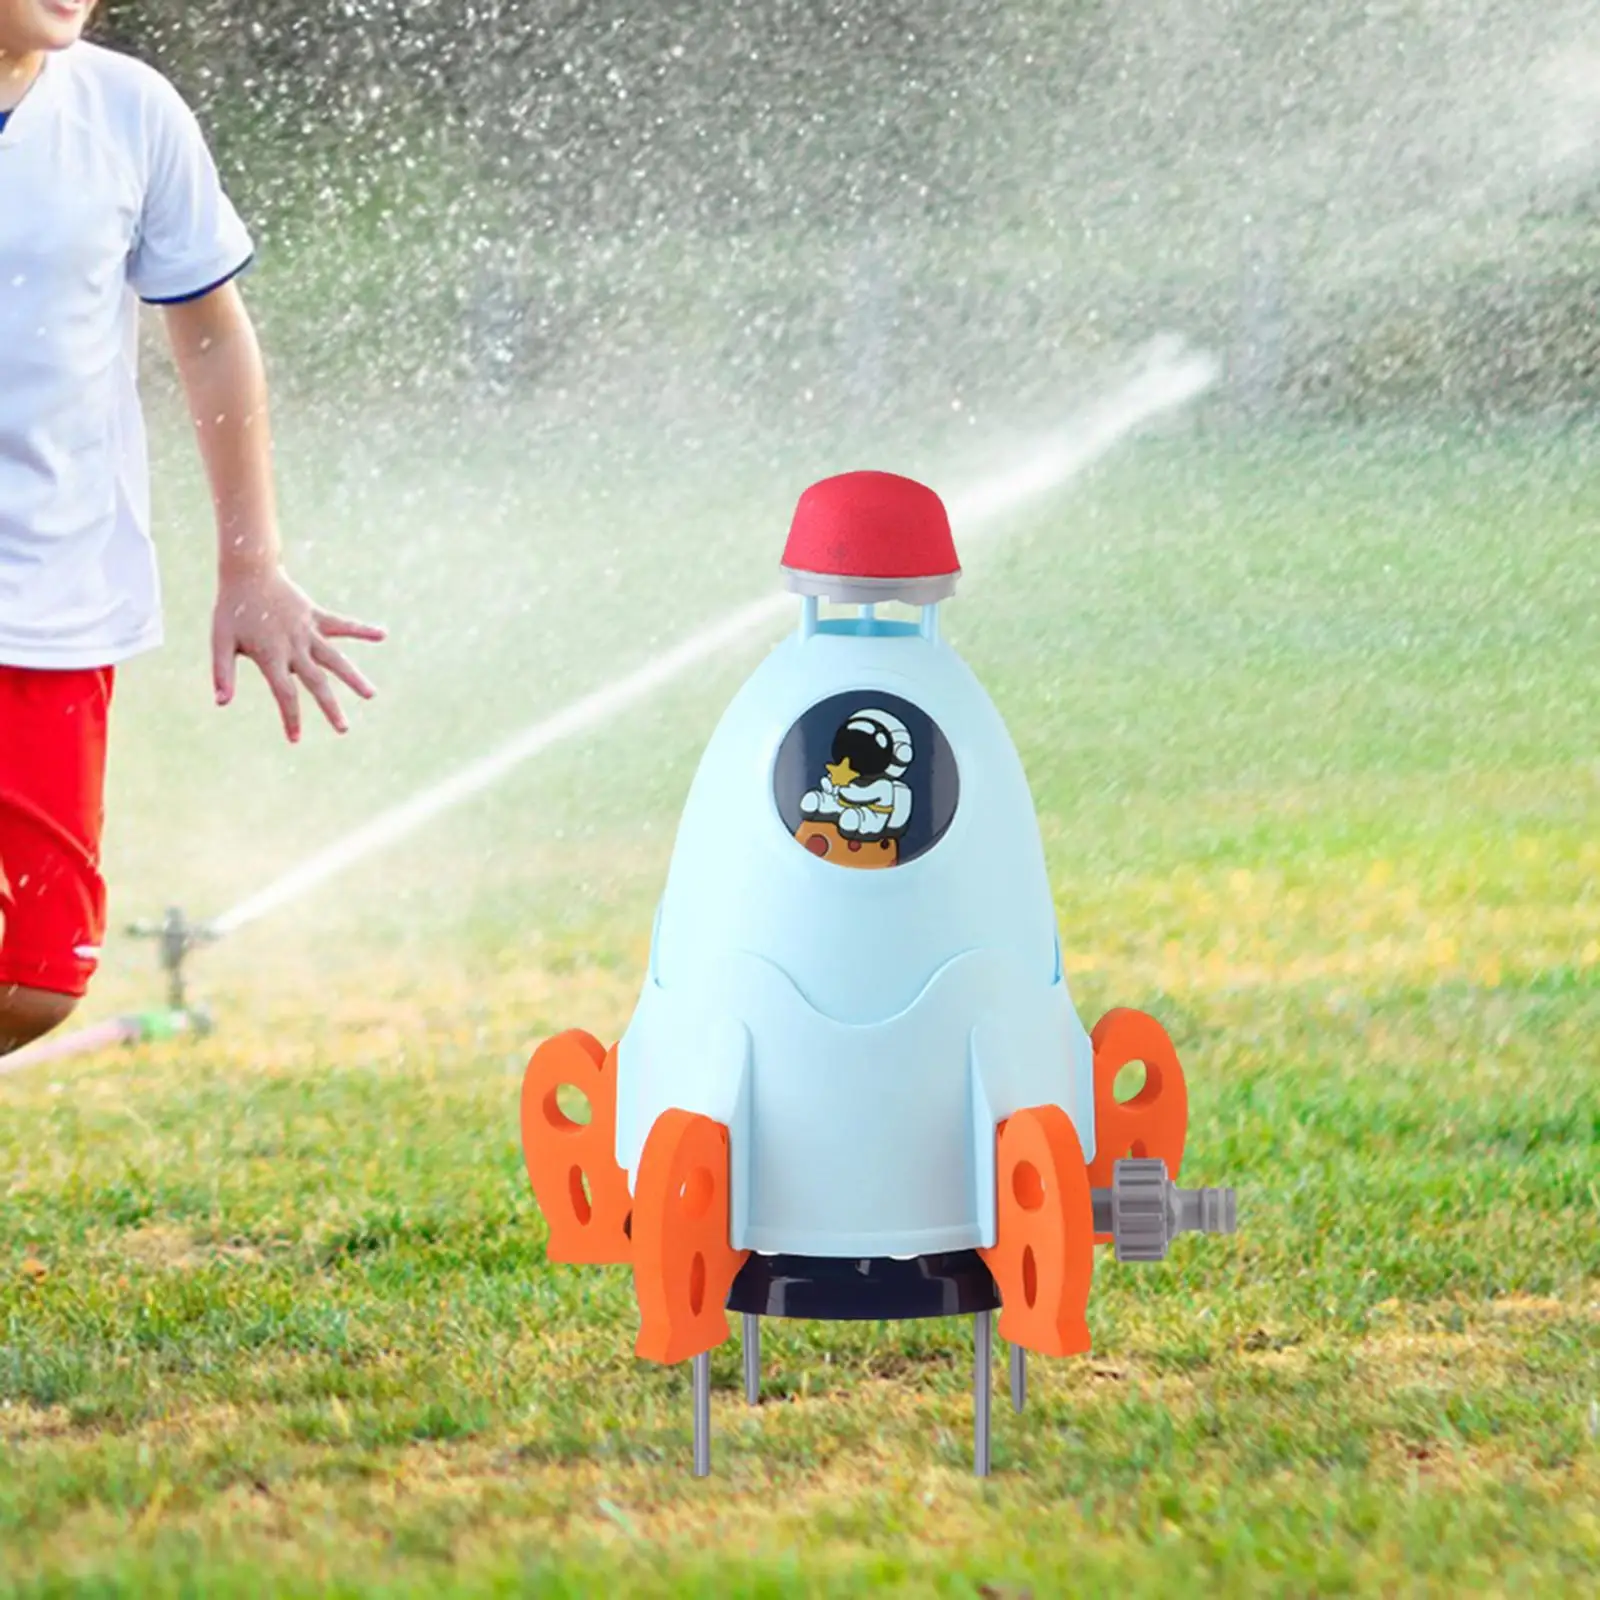 Water Spray Rocket Toys Outside Water Toys Kids Summer Toys Outdoor Rocket Toys for Garden Outdoor Beach Swimming Pool